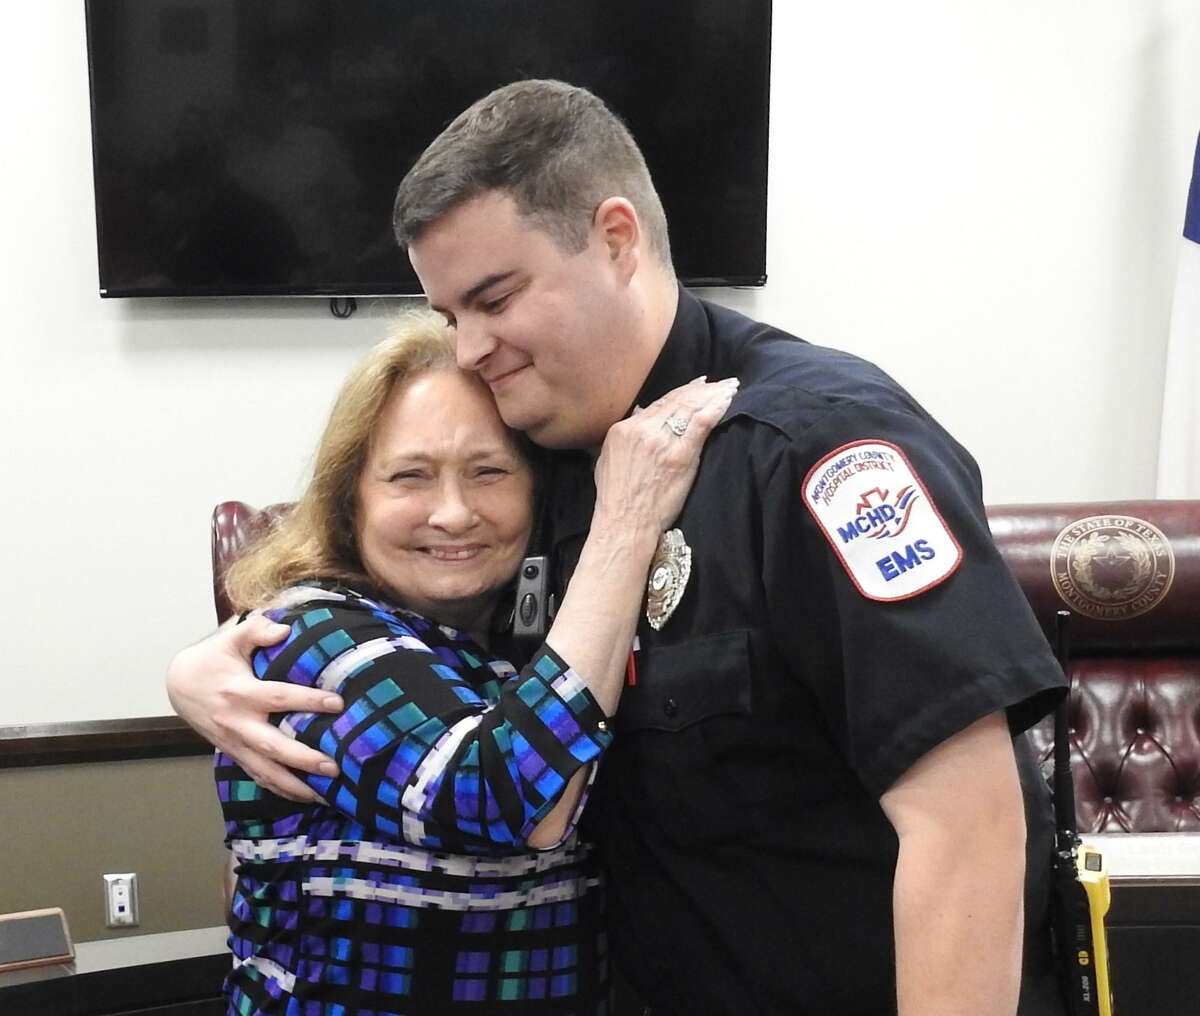 Spring resident Evelyn Huddleston hugs MCHD paramedic Spencer Lantz at a reunion with the first responders who helped save her after she suffered a cardiac arrest recently.